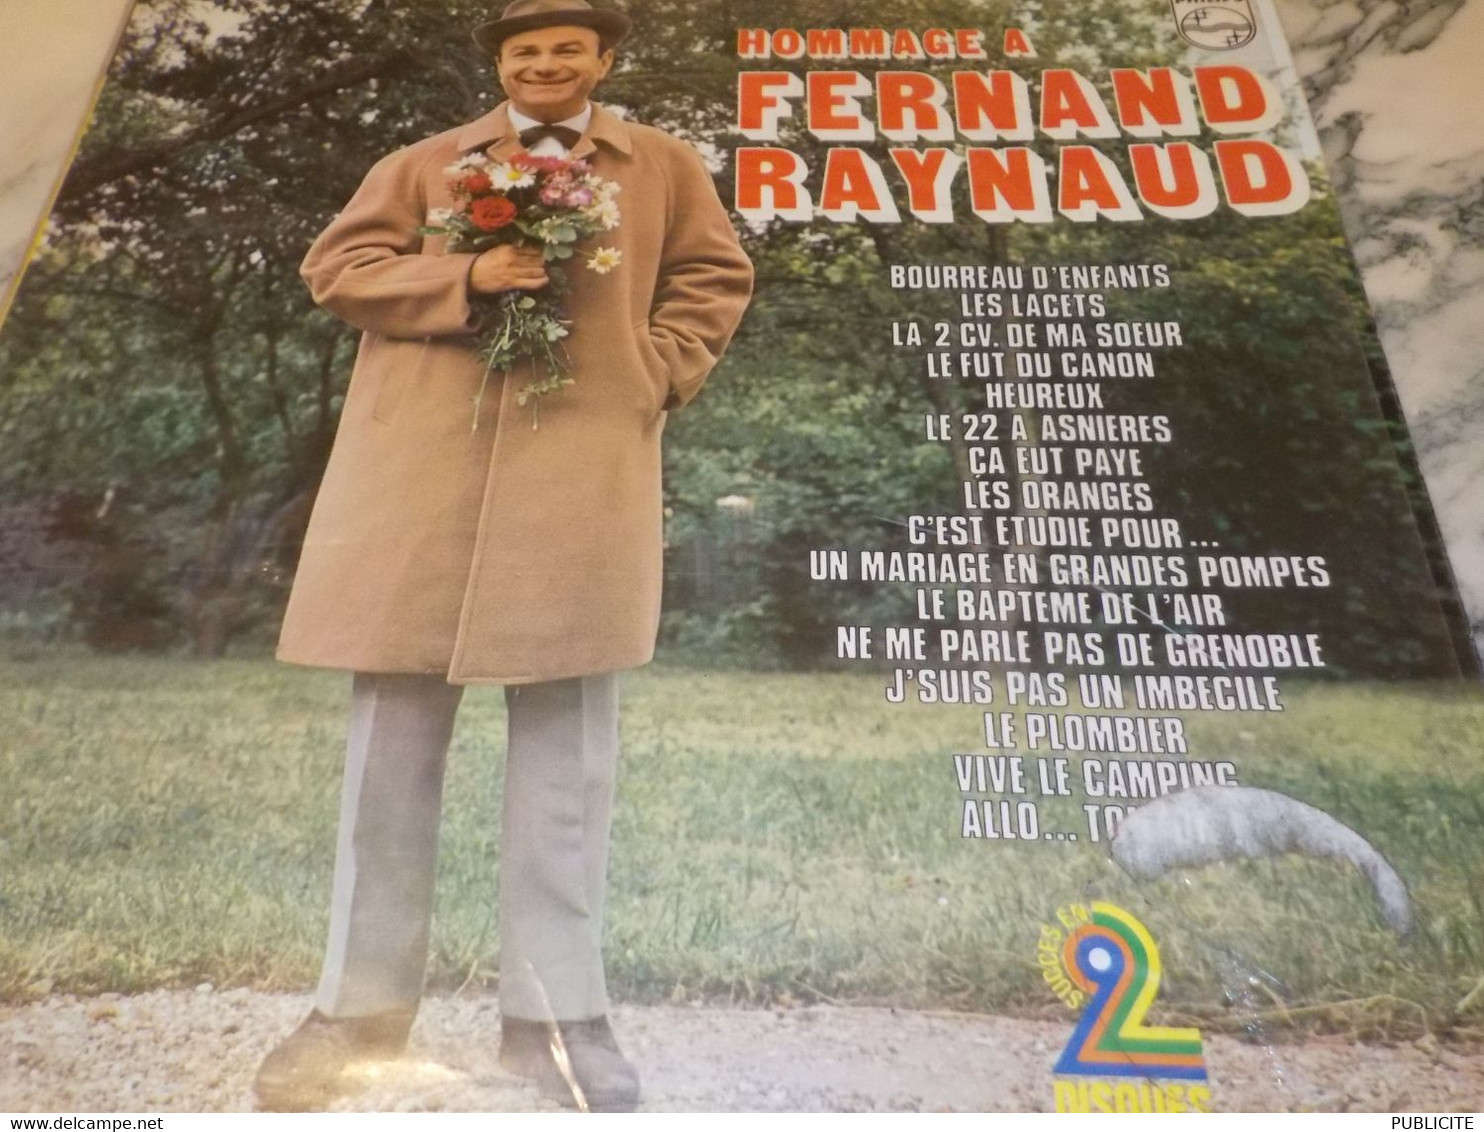 2 DISQUE 33 TOURS HOMMAGE A FERNAND RAYNAUD 1983 - Humor, Cabaret